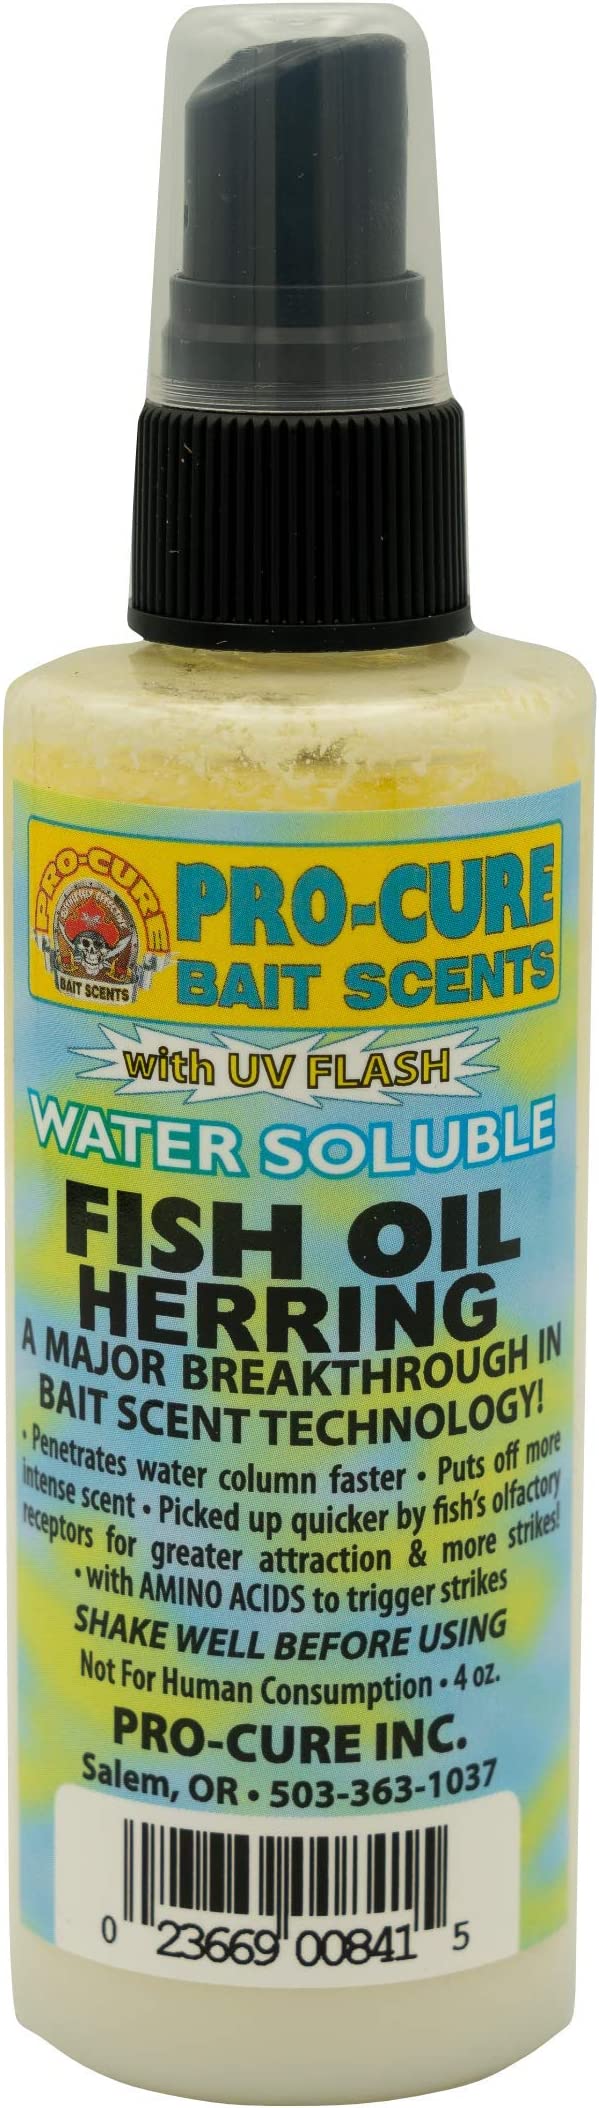 Pro-Cure Bait Scents  Herring Water Soluble Fish Oil, 4-Ounce WS-HER